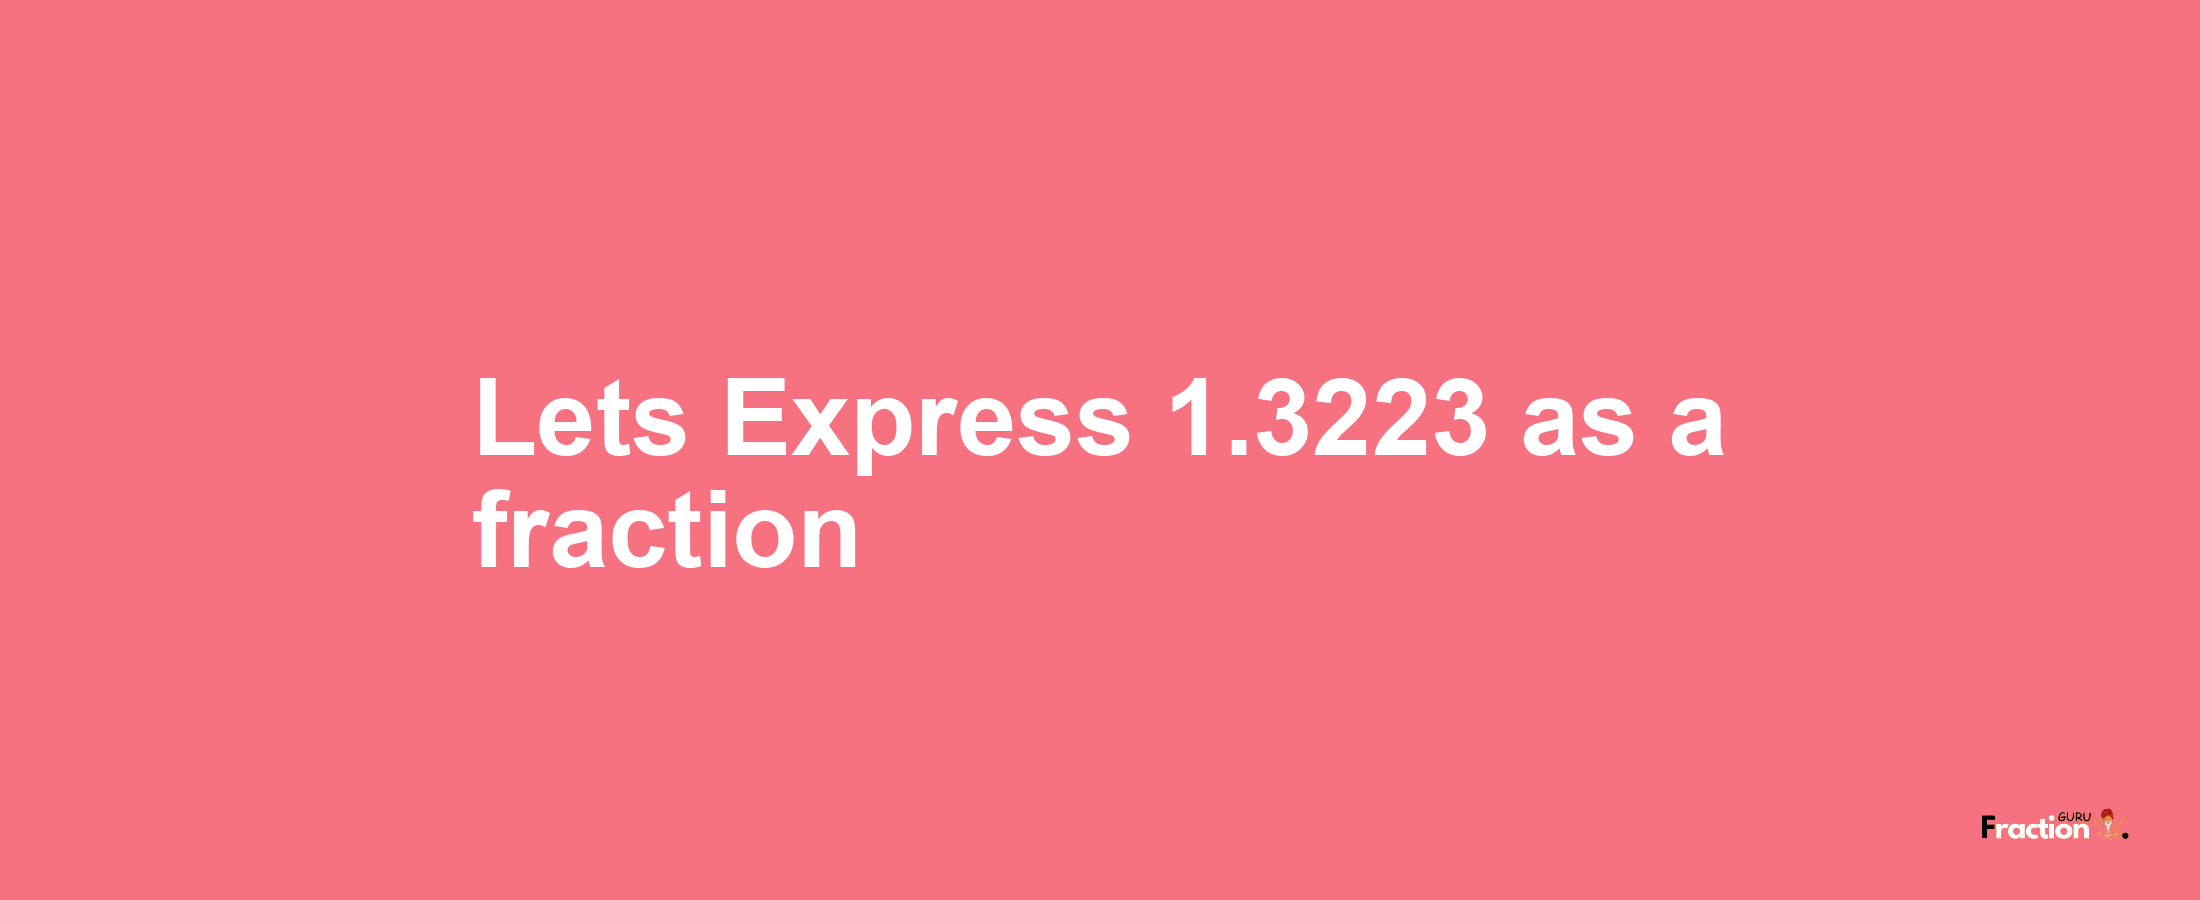 Lets Express 1.3223 as afraction